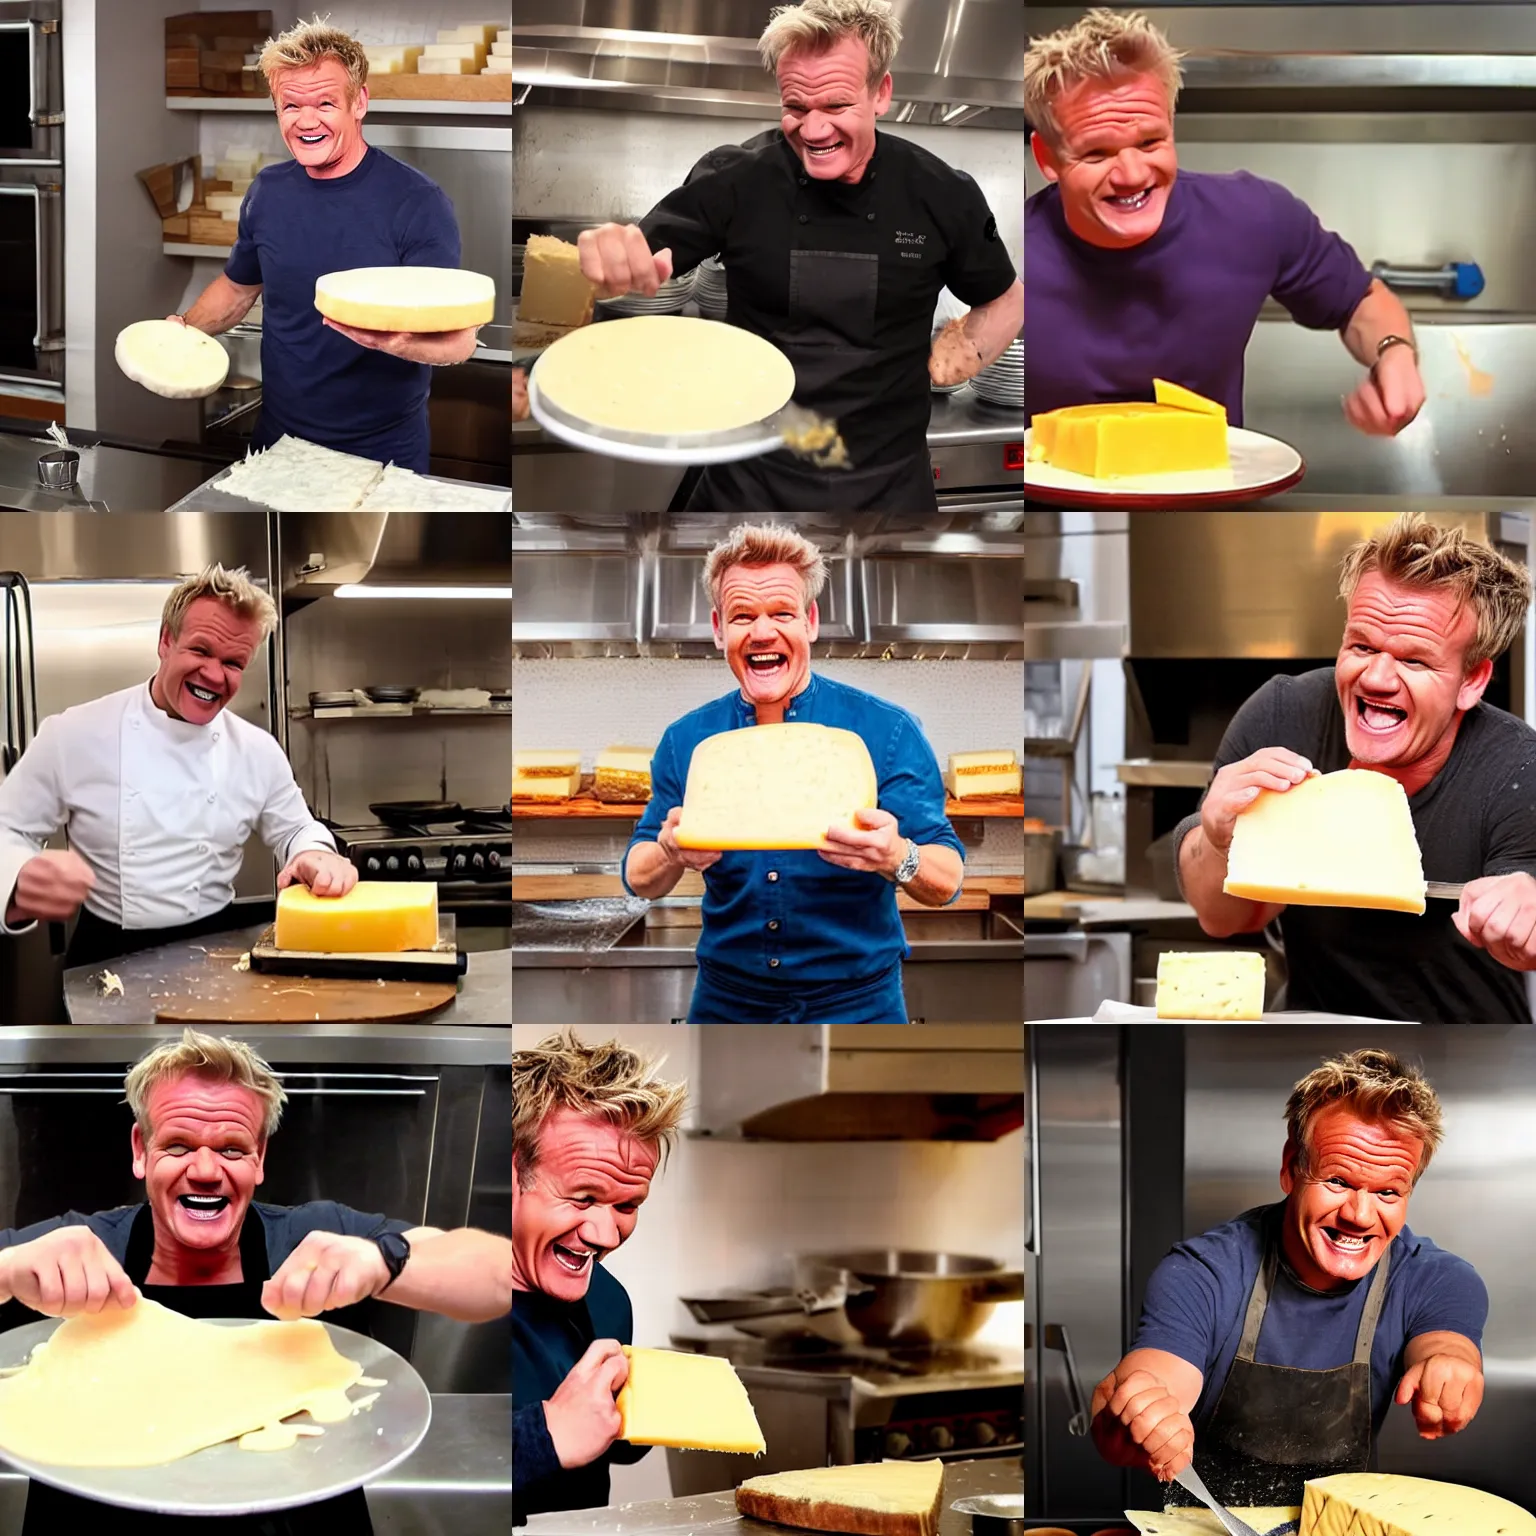 Prompt: gordon ramsey laughing maniacly while shredding cheese on a plate that is overflowing with cheese making a huge mess